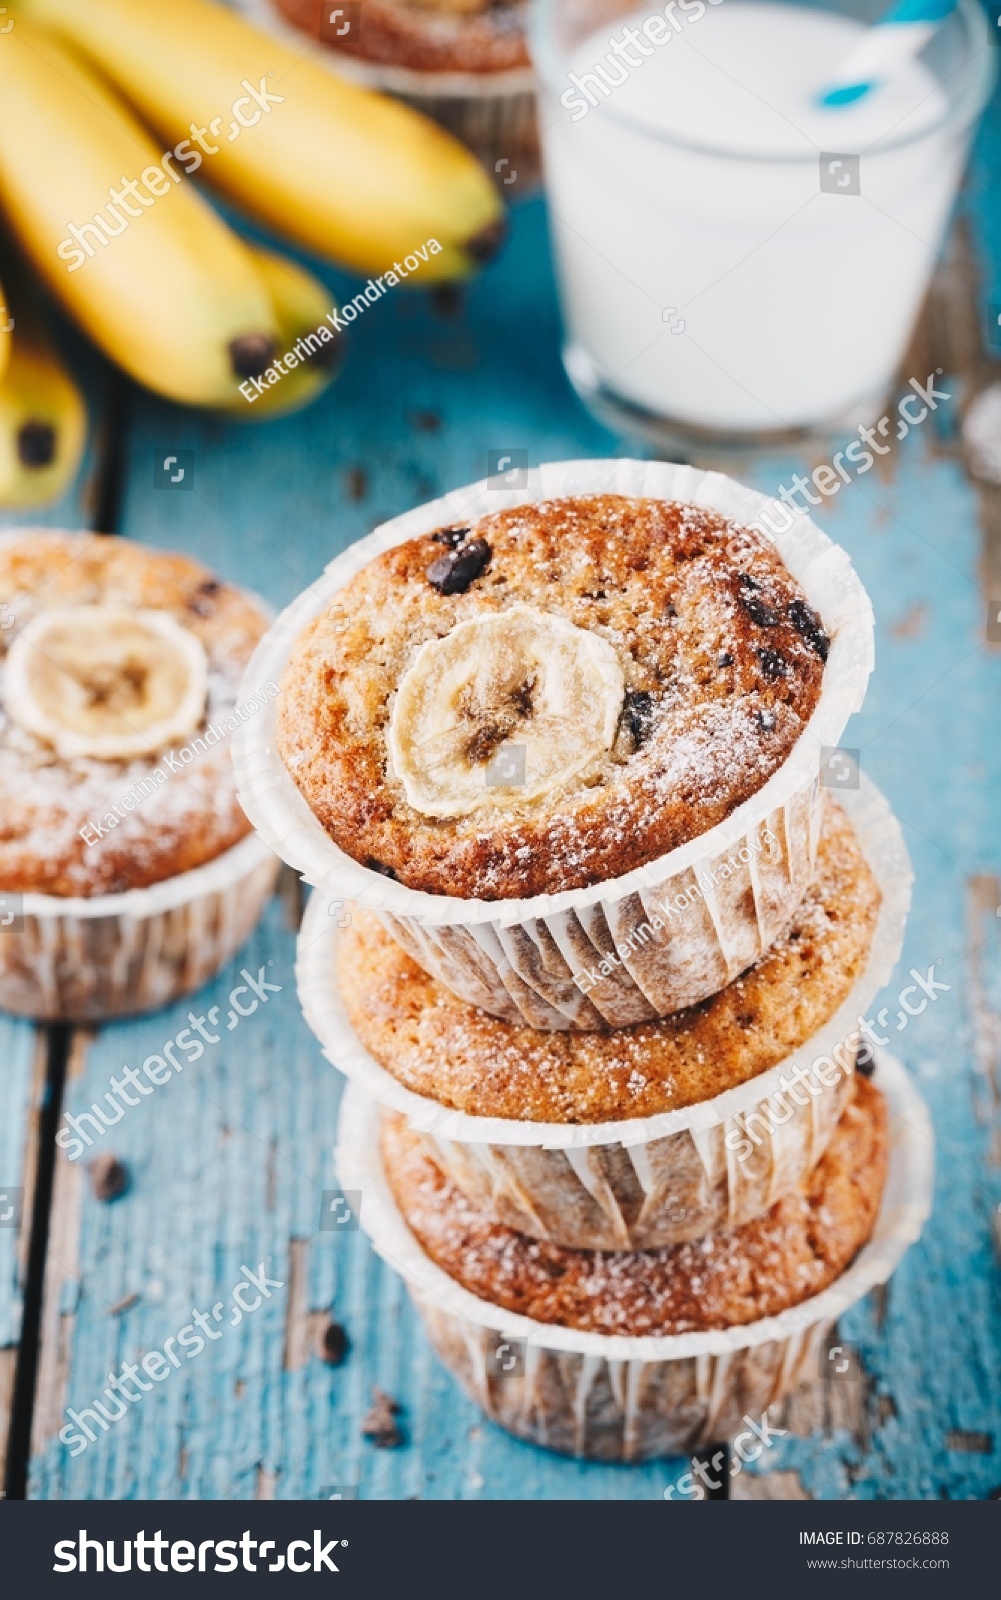 chocolate chips banana muffins on rustic background #687826888